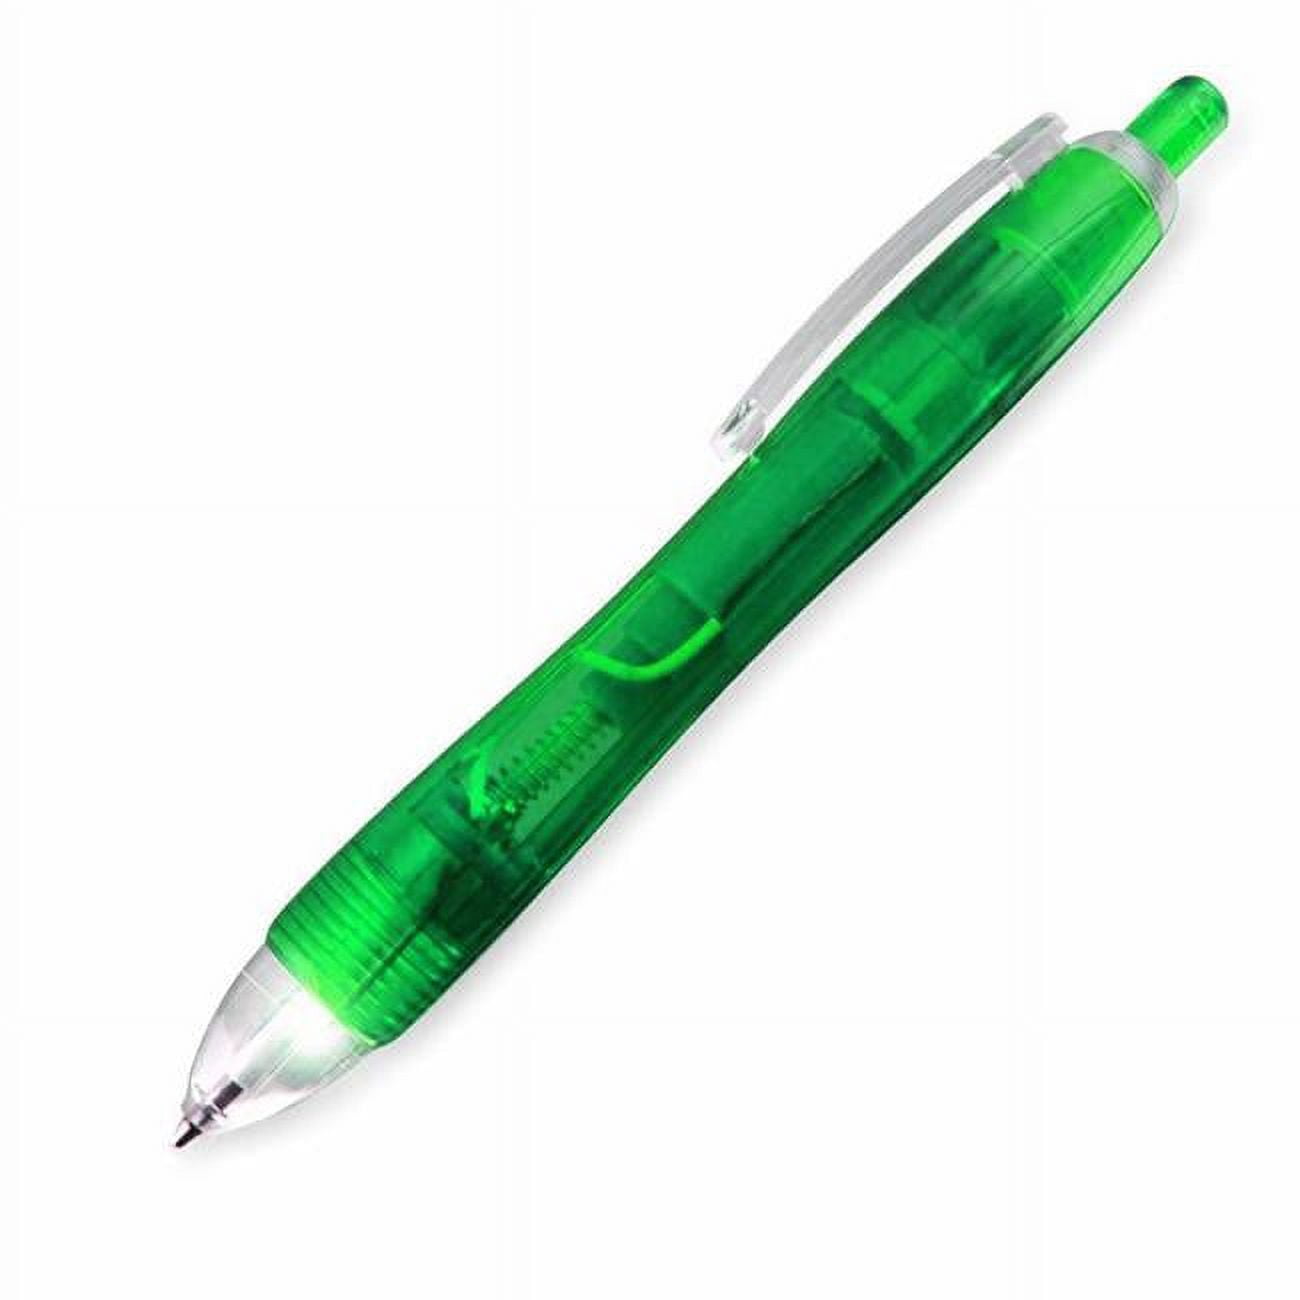 1500012 Green Tip Pen With White Led